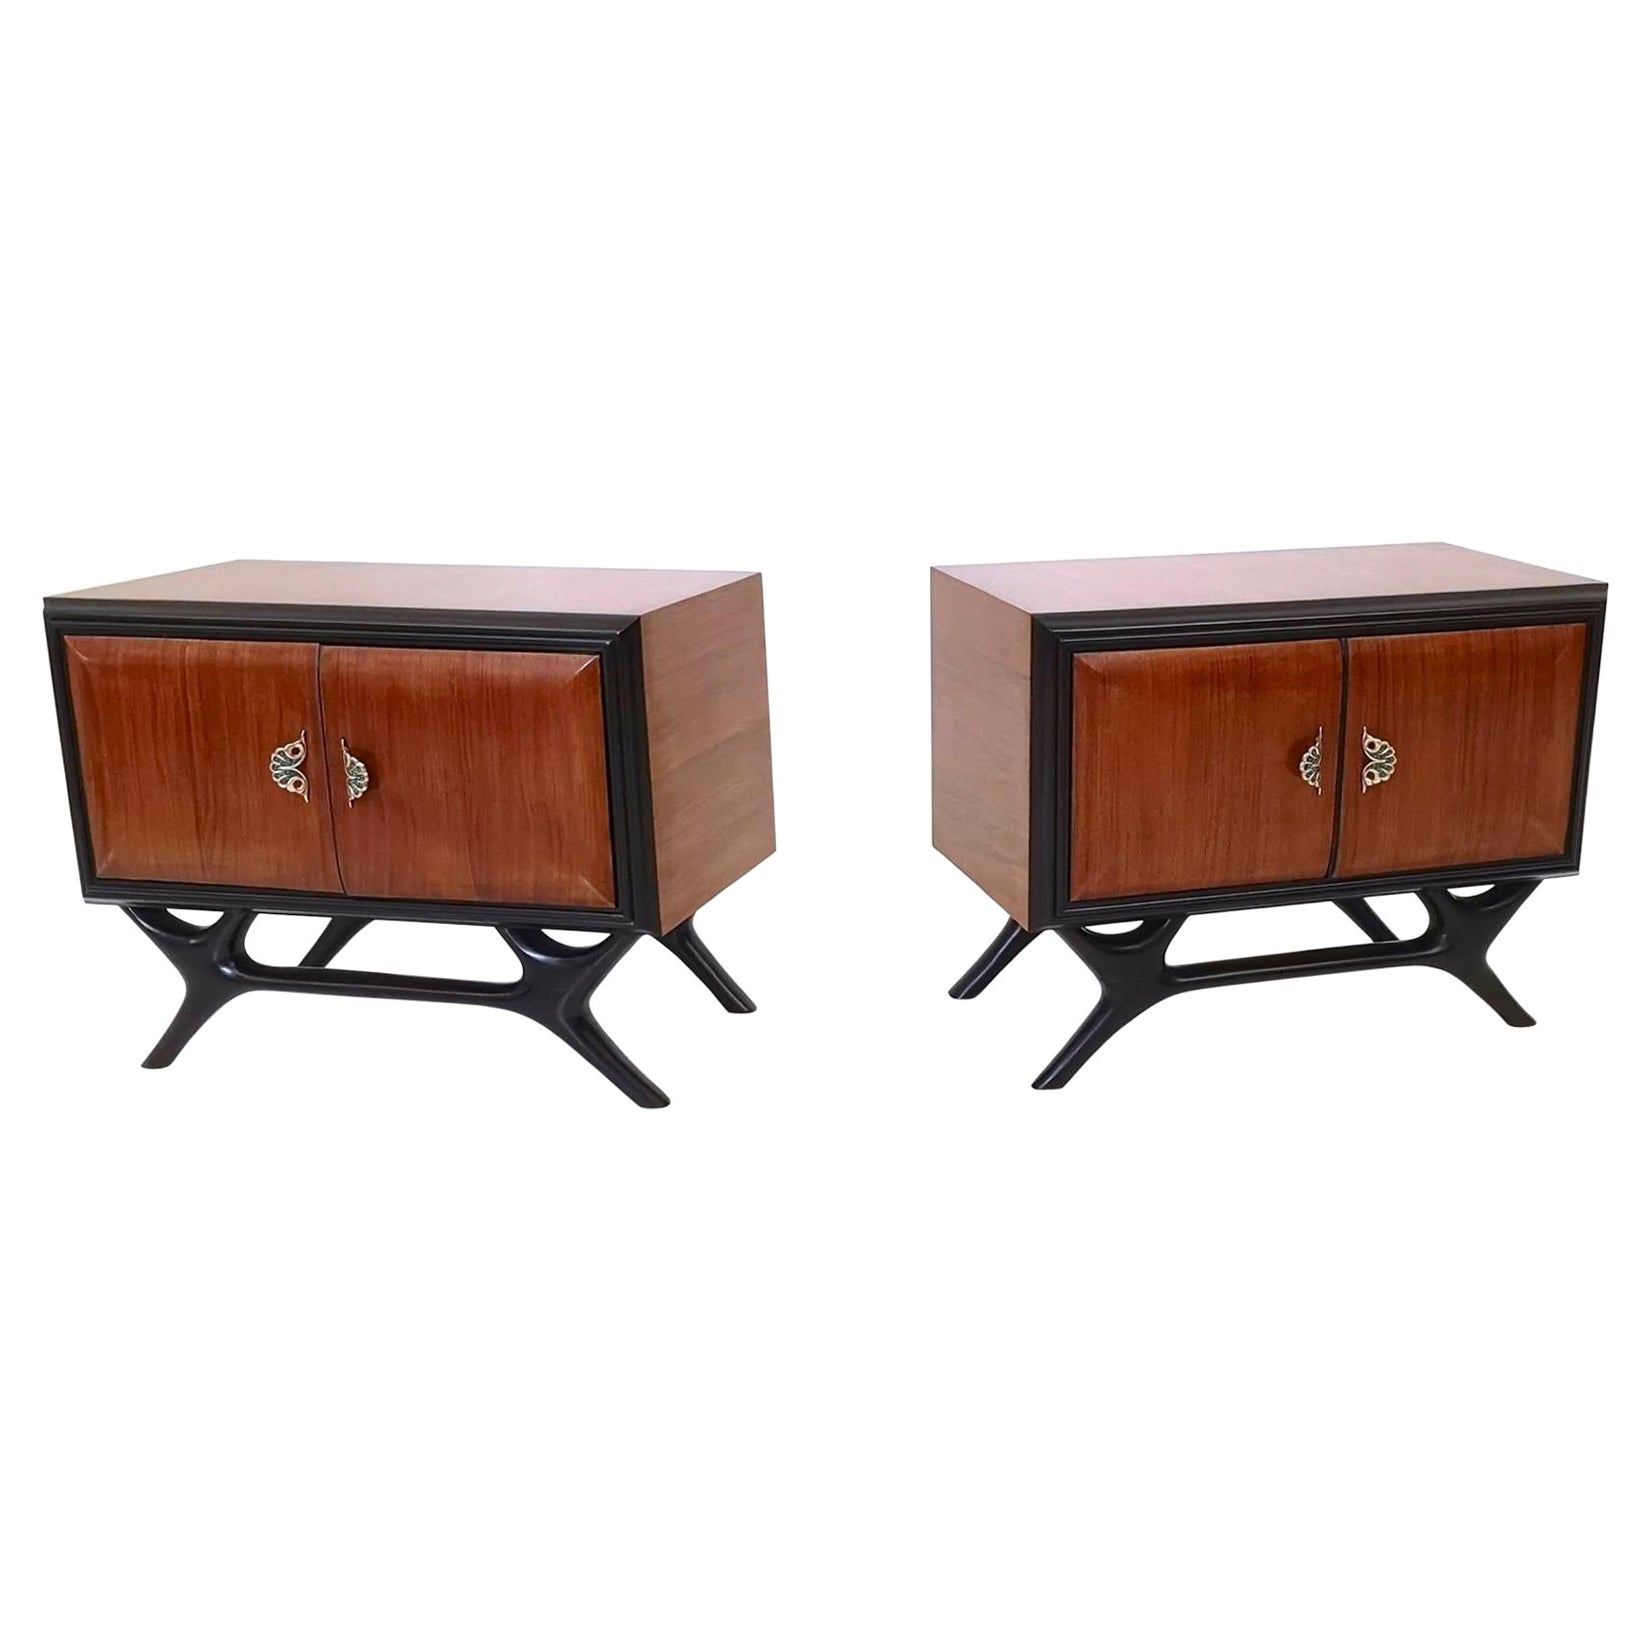 Pair of Vintage Walnut and Ebonized Wood Nightstands with Brass Handles, Italy